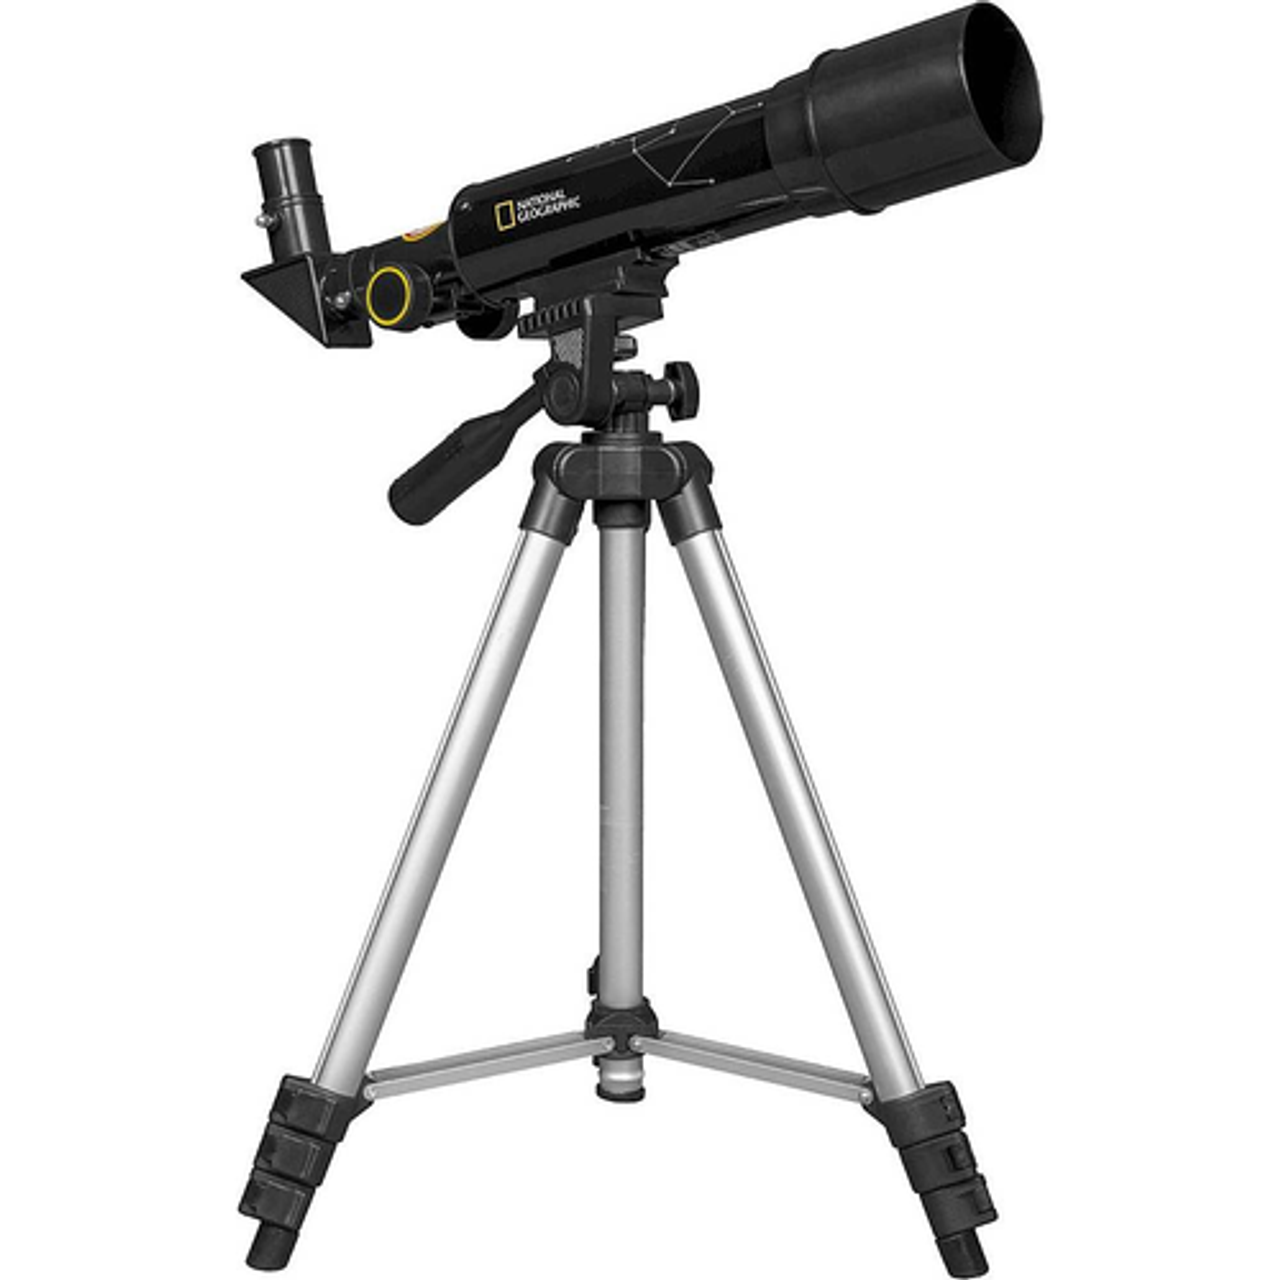 National Geographic - 50mm Refractor Telescope and Microscope Set